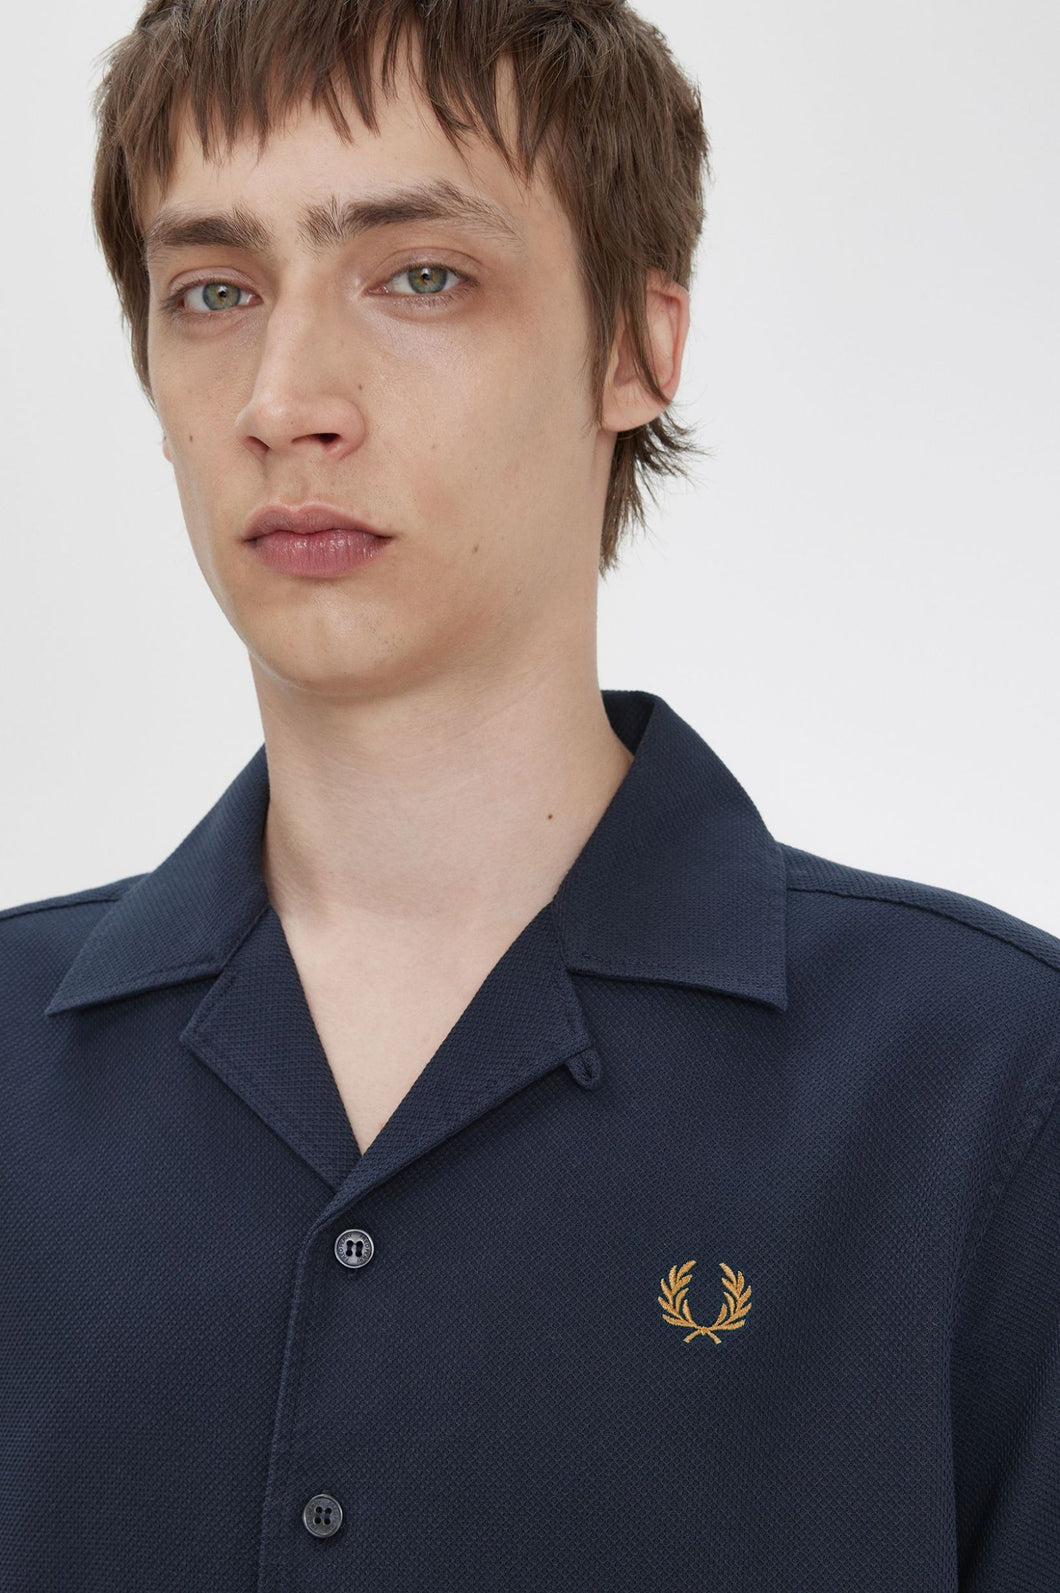 Fred Perry Navy Pique Textured Revere Collar Shirt